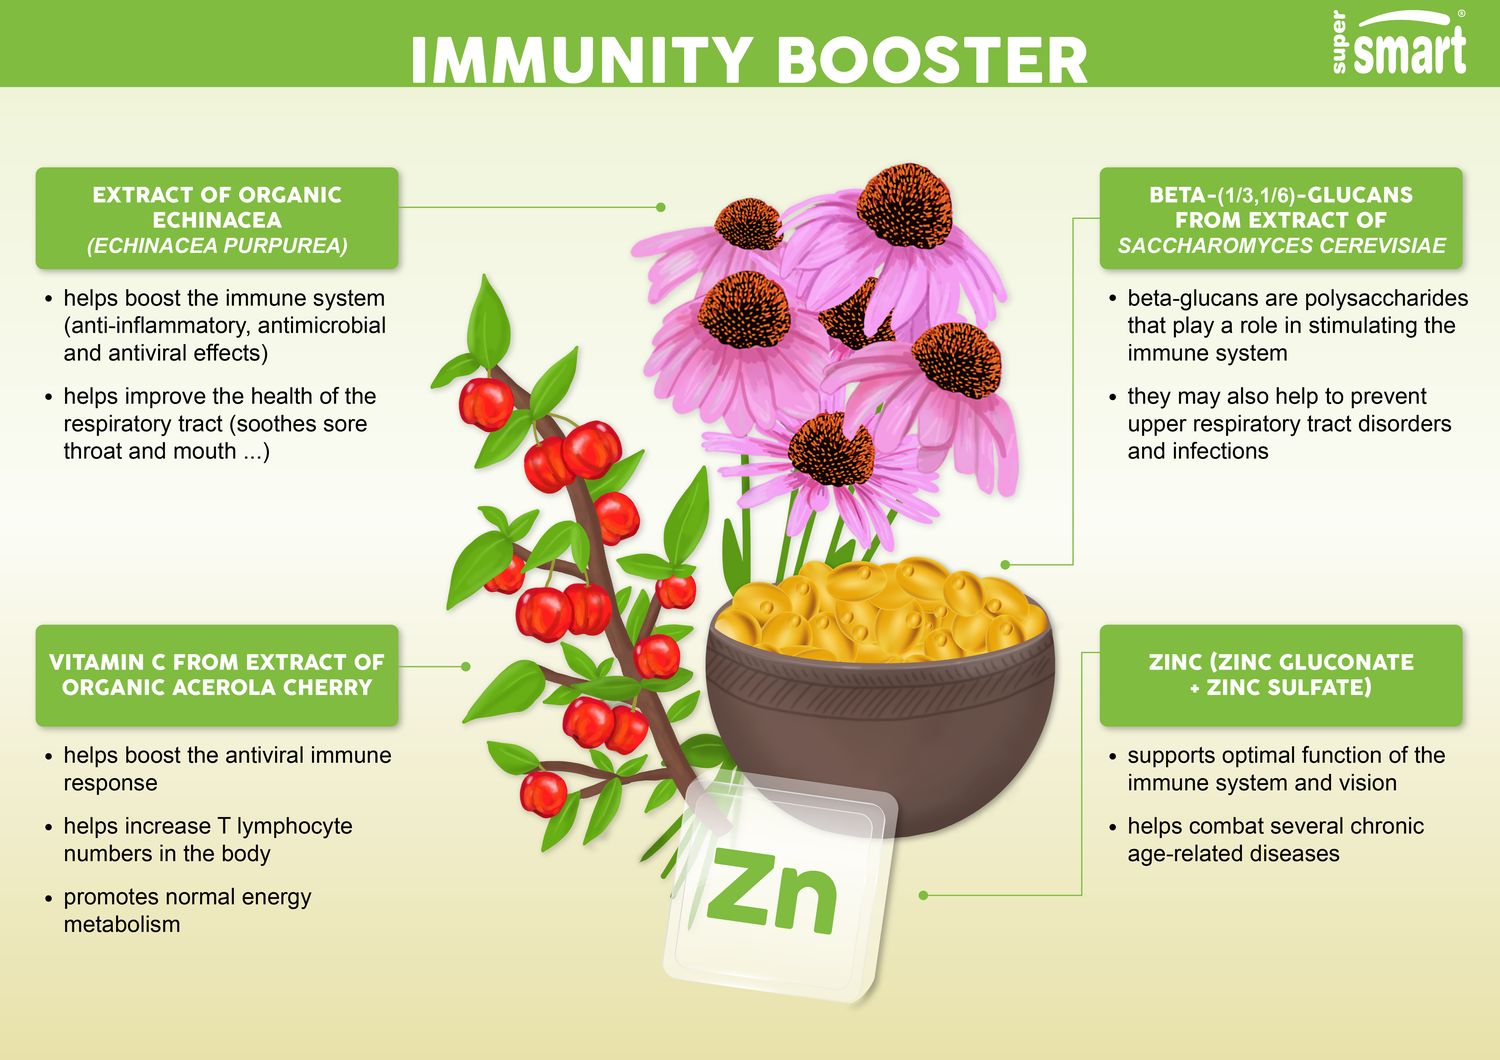 Immunity Booster An Organic Echinacea Supplement For Boosting Immunity